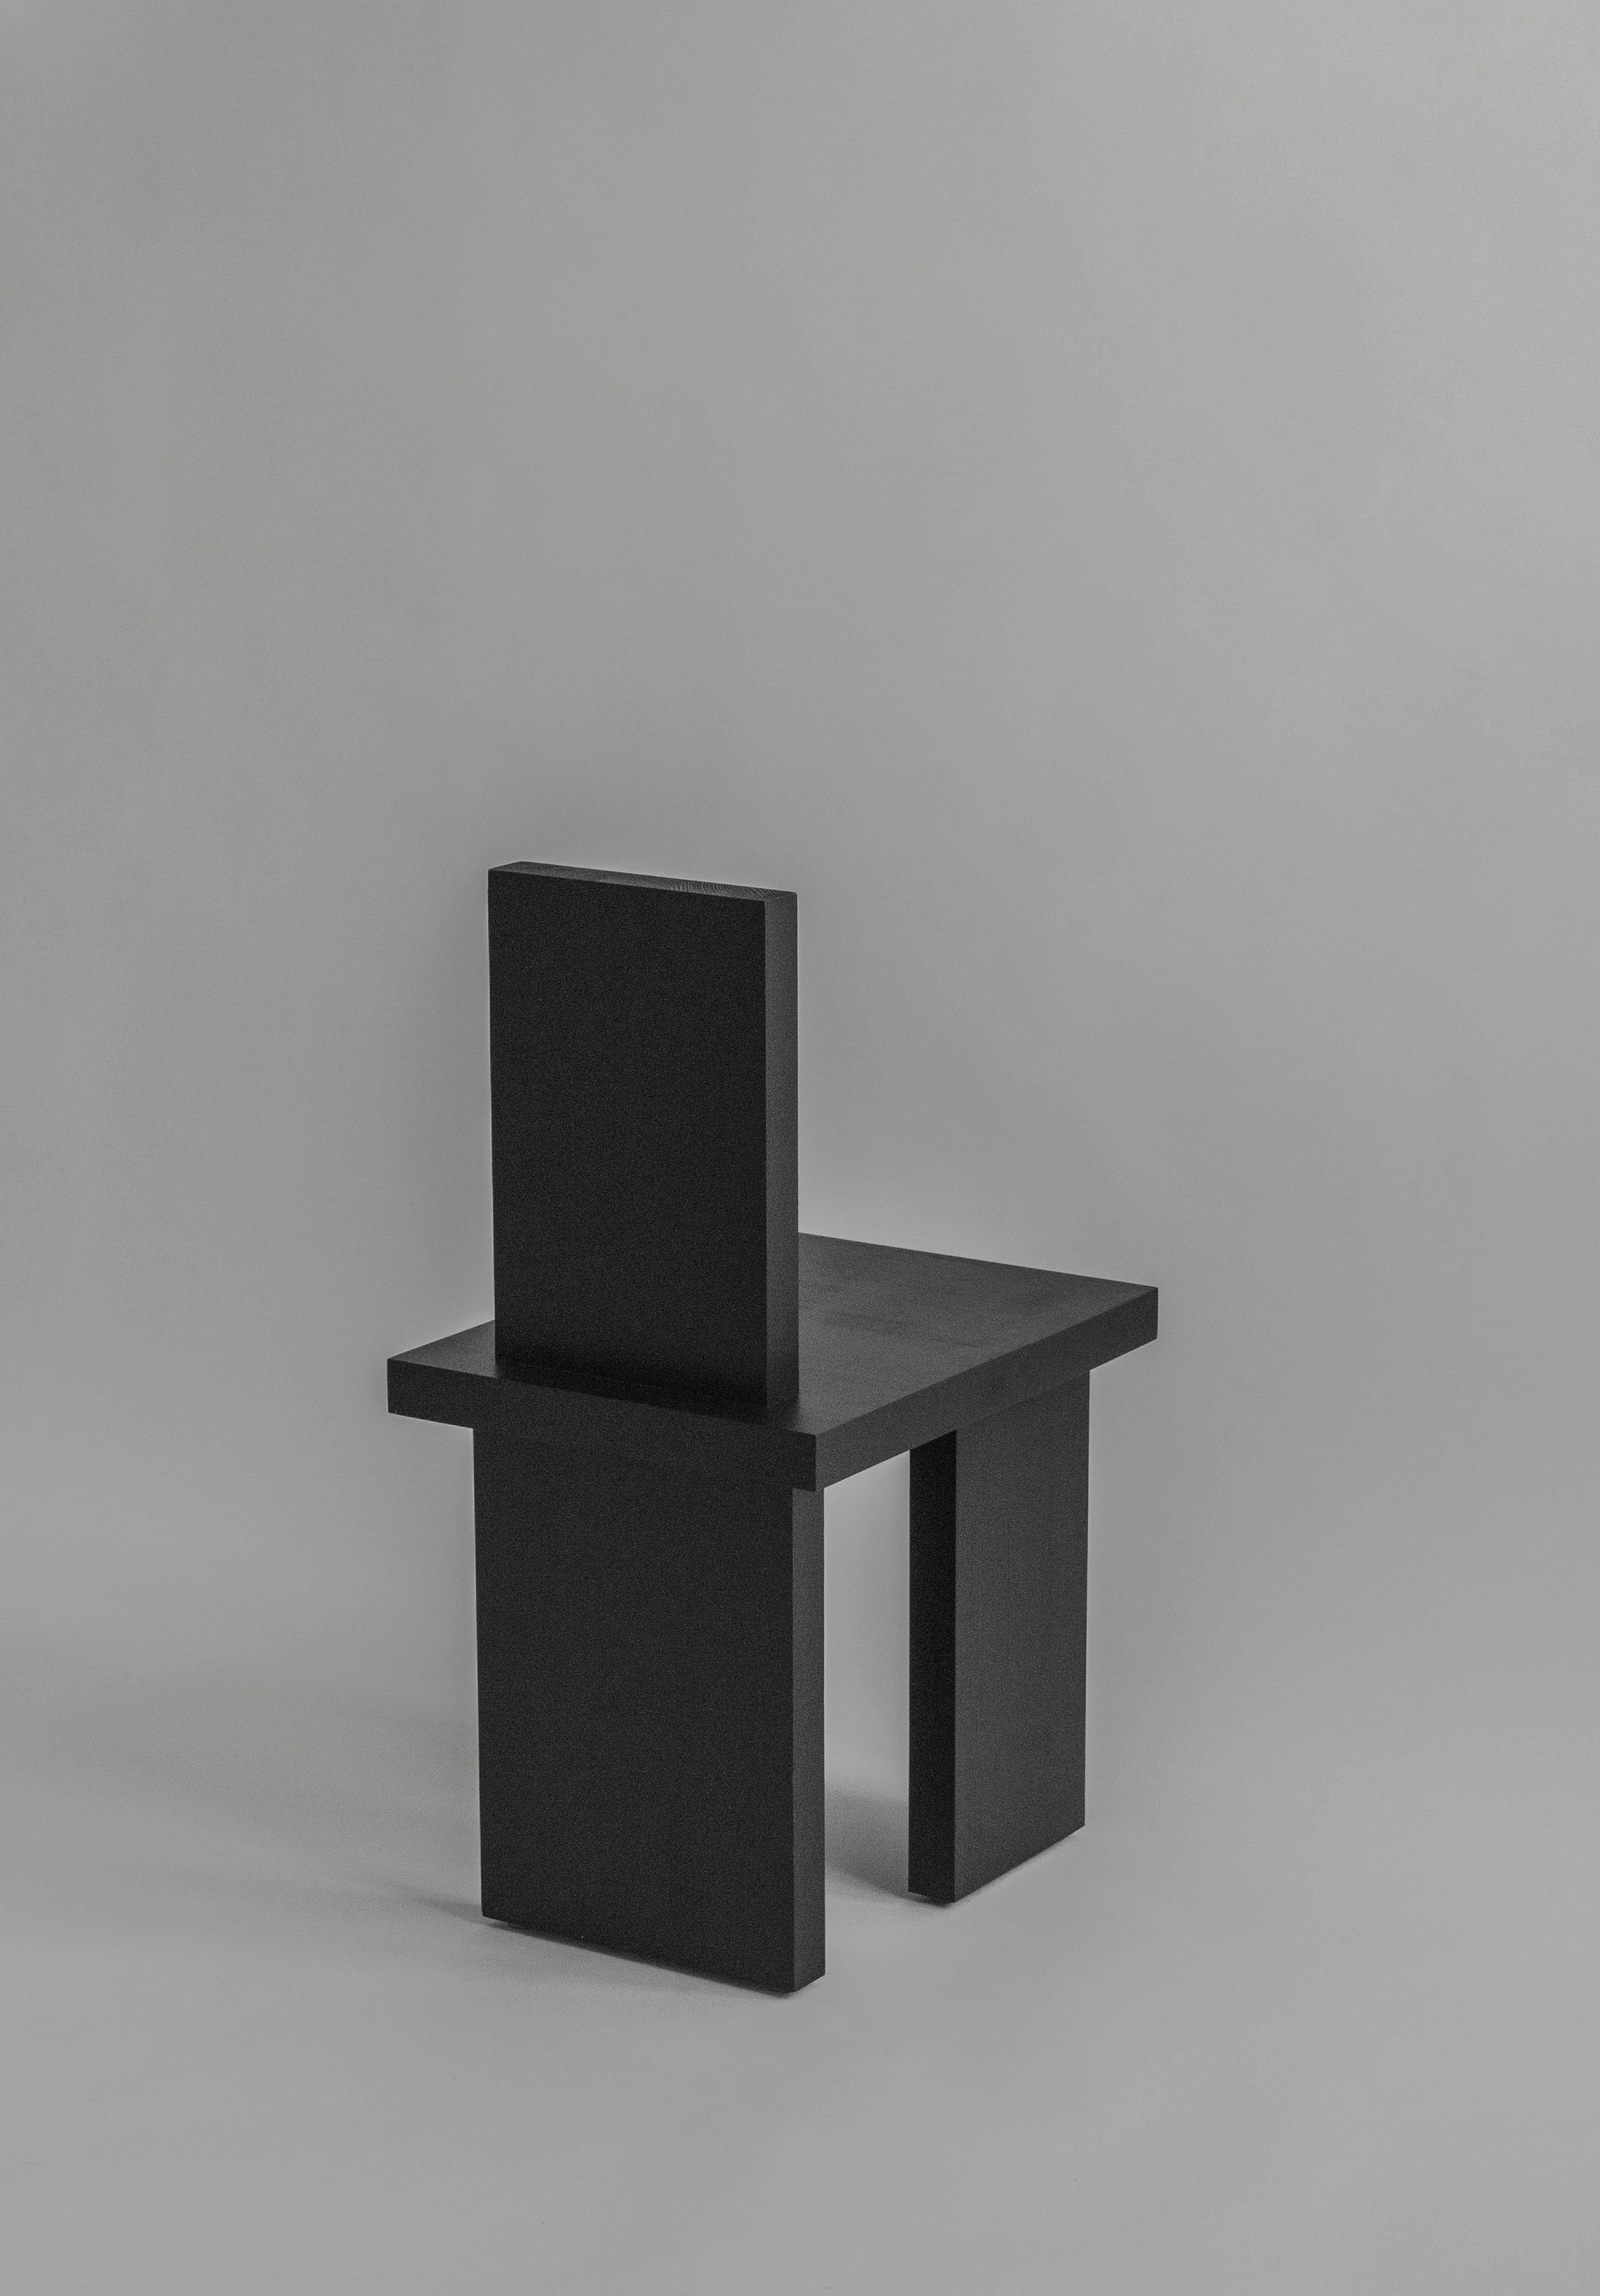 ItooRaba dining chair by Sizar Alexis
Signed
Dimensions: Length 36 x width 47 x height 77cm
Seat height 42cm

Comes in stained black, white and natural pine

A furniture series that embraces geometrical shapes. Inspired by the passion for